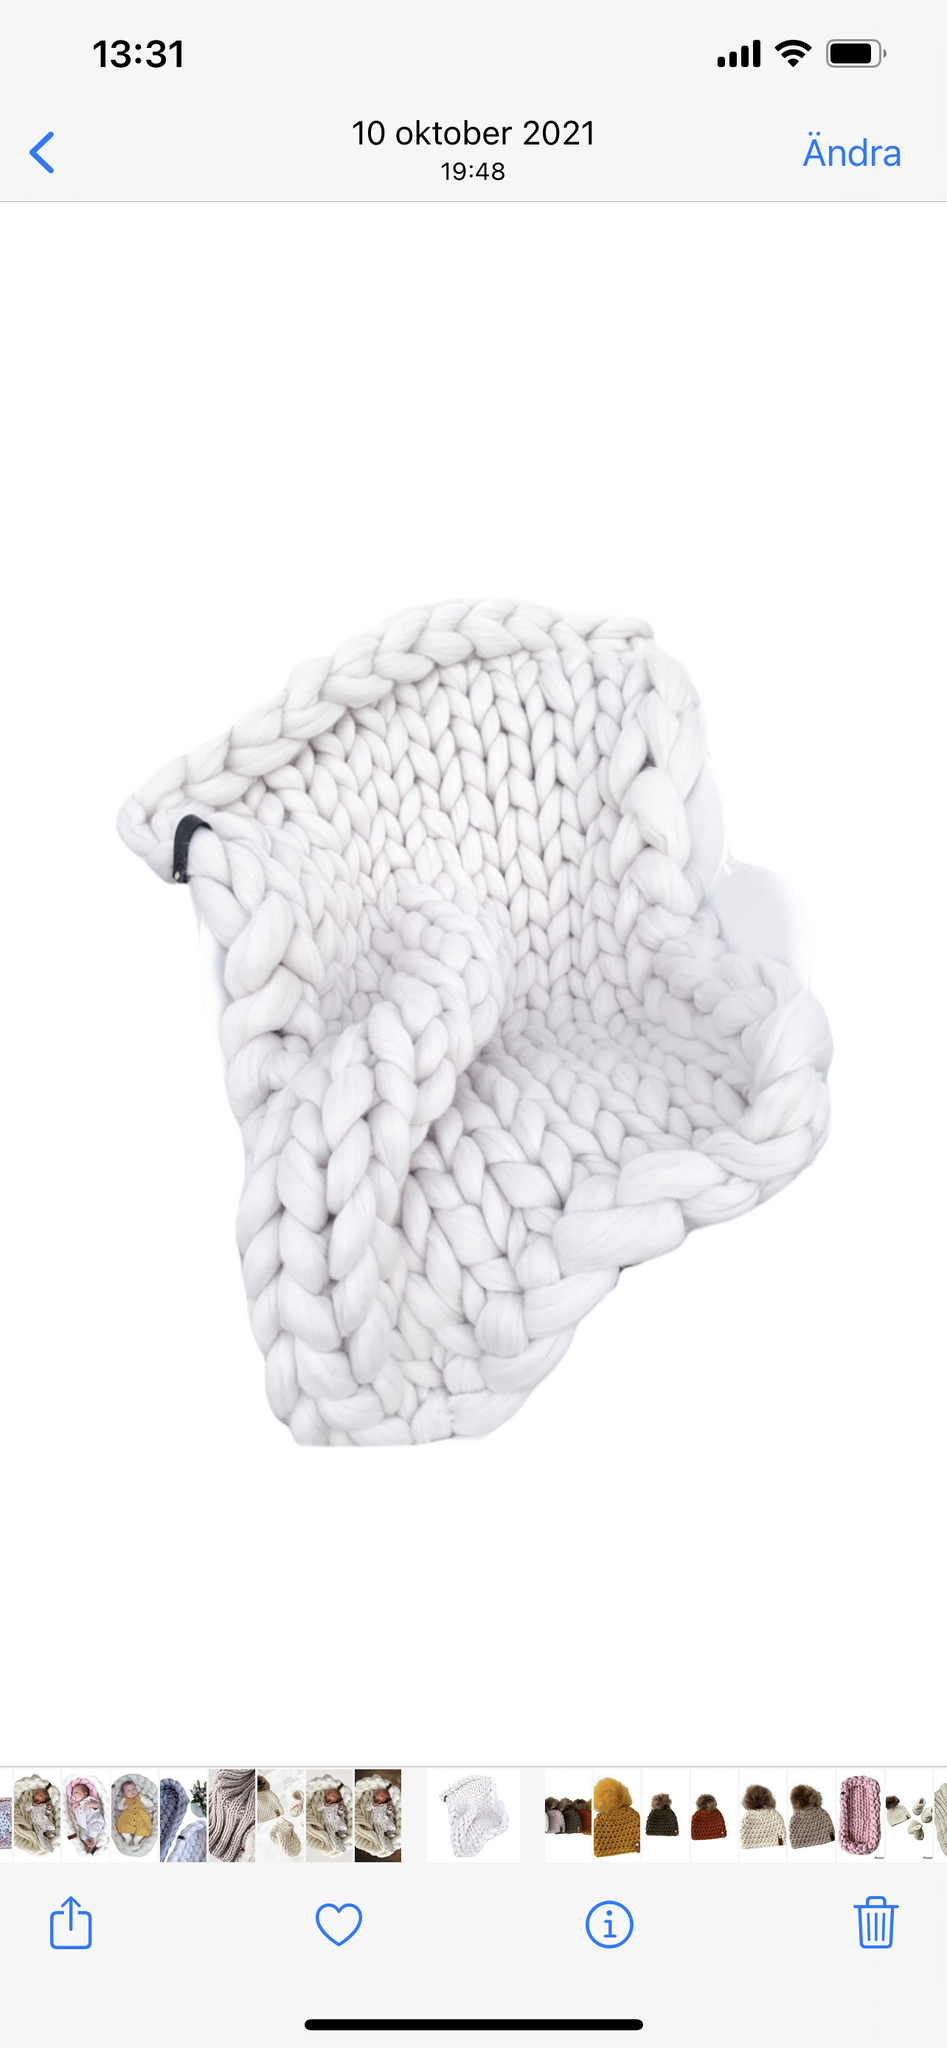 CHUNKY KNIT BLANKET SMALL 80x100